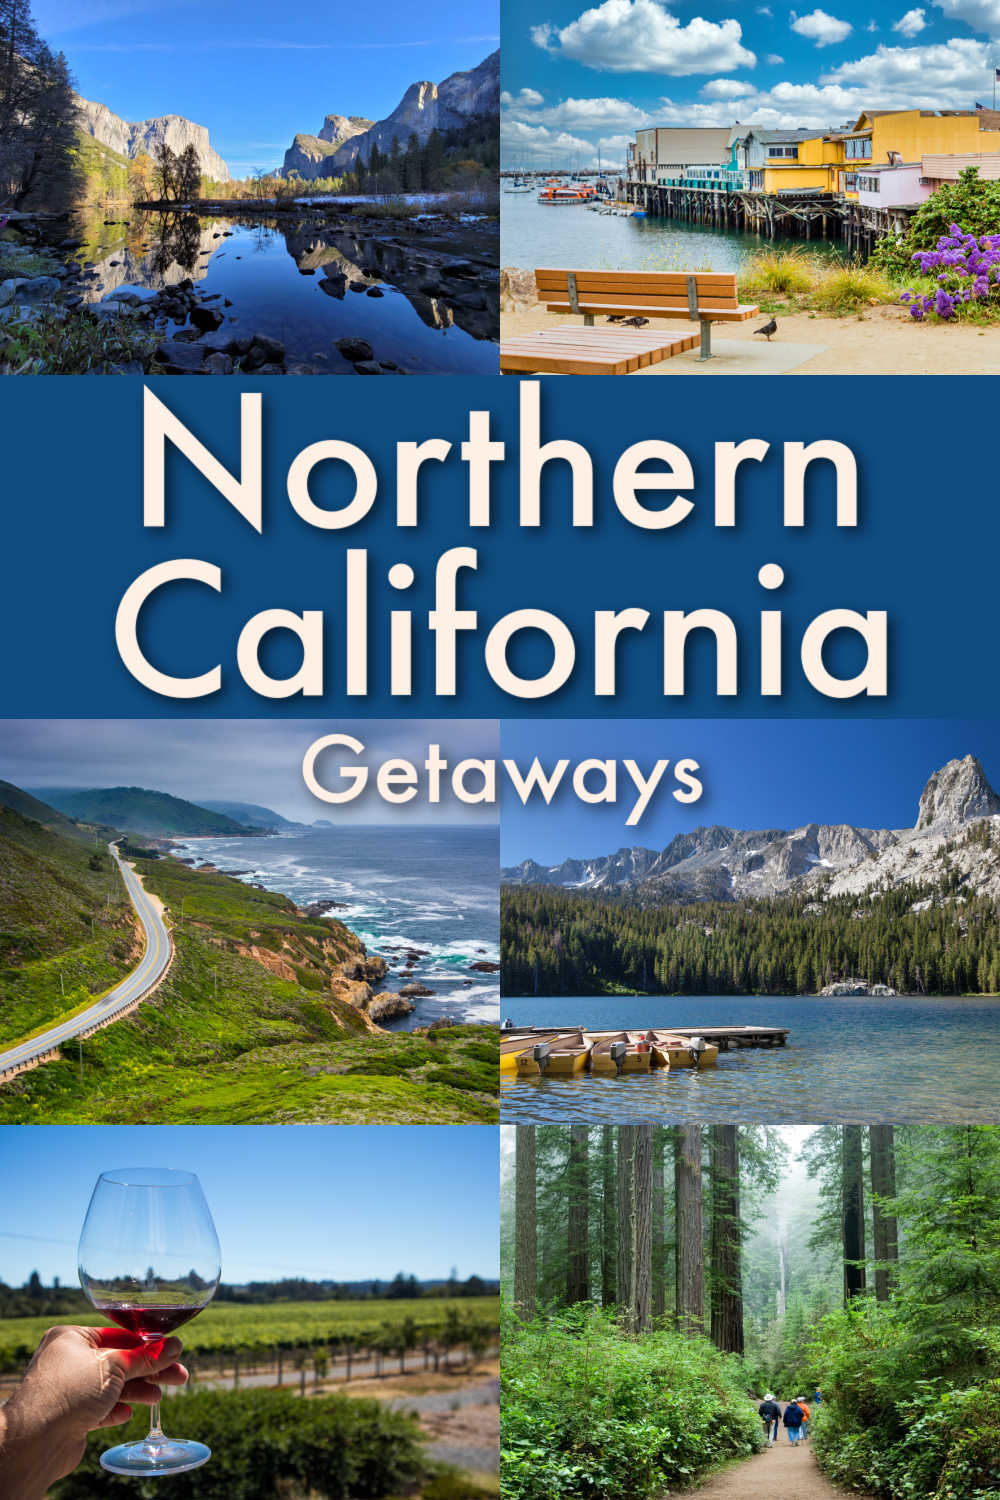 The best Northern California travel ideas are here!
Perfect places for your Northern California getaway, with tips on how to get there, where to stay, and what to do in each destination. You only need to pack your bags and go!
Suggestion for a weekend trip in Northern California with friends and families, and even where to go for a romantic trip in Northern California.

Northern California Travel | romantic weekend getaways in Northern California | Northern California road trip|
